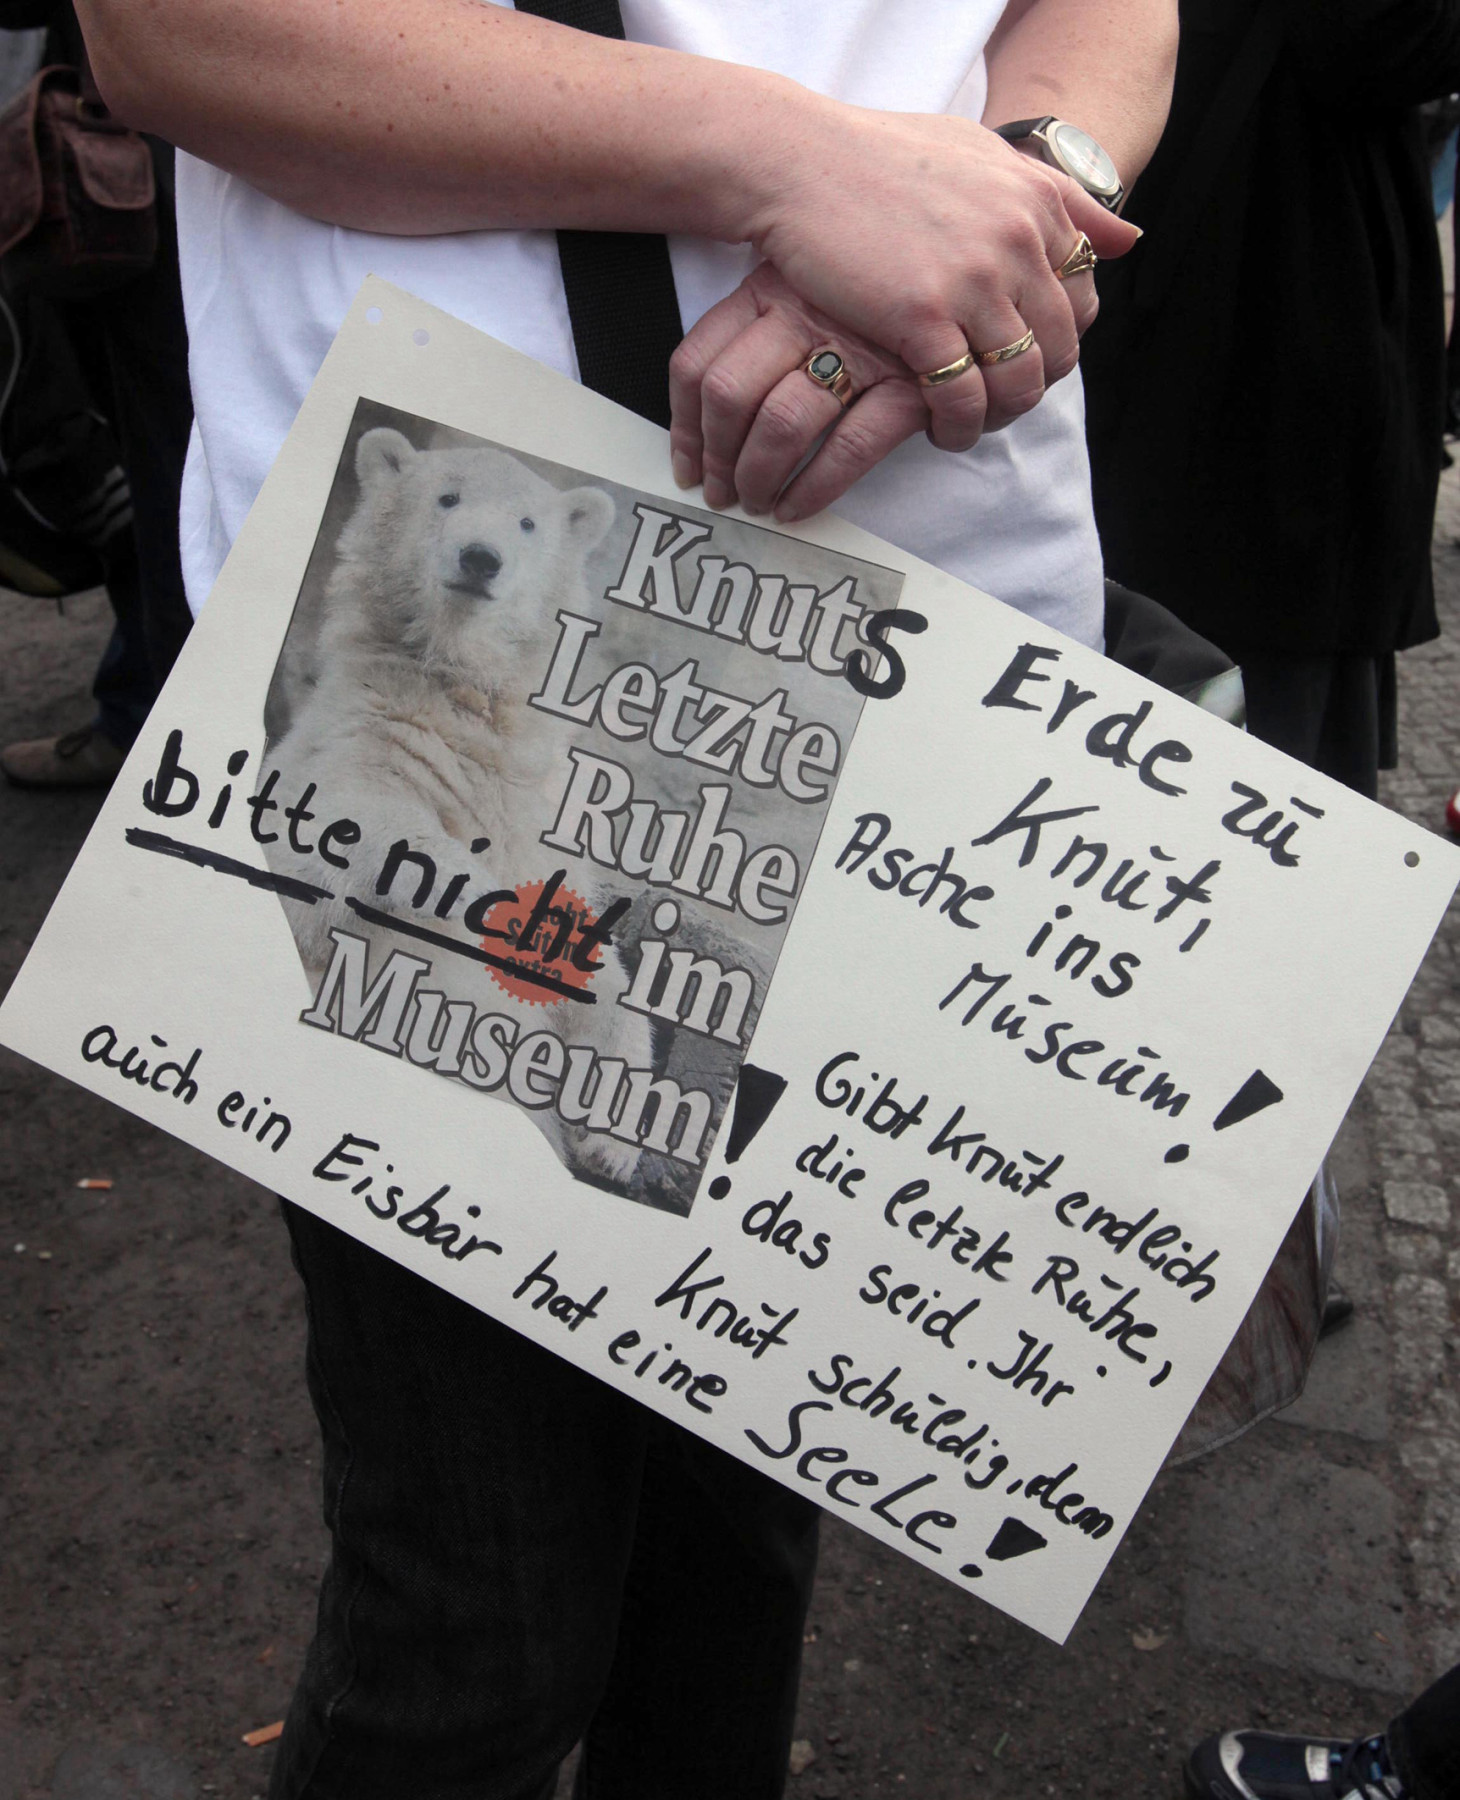 Image of the protest poster described above